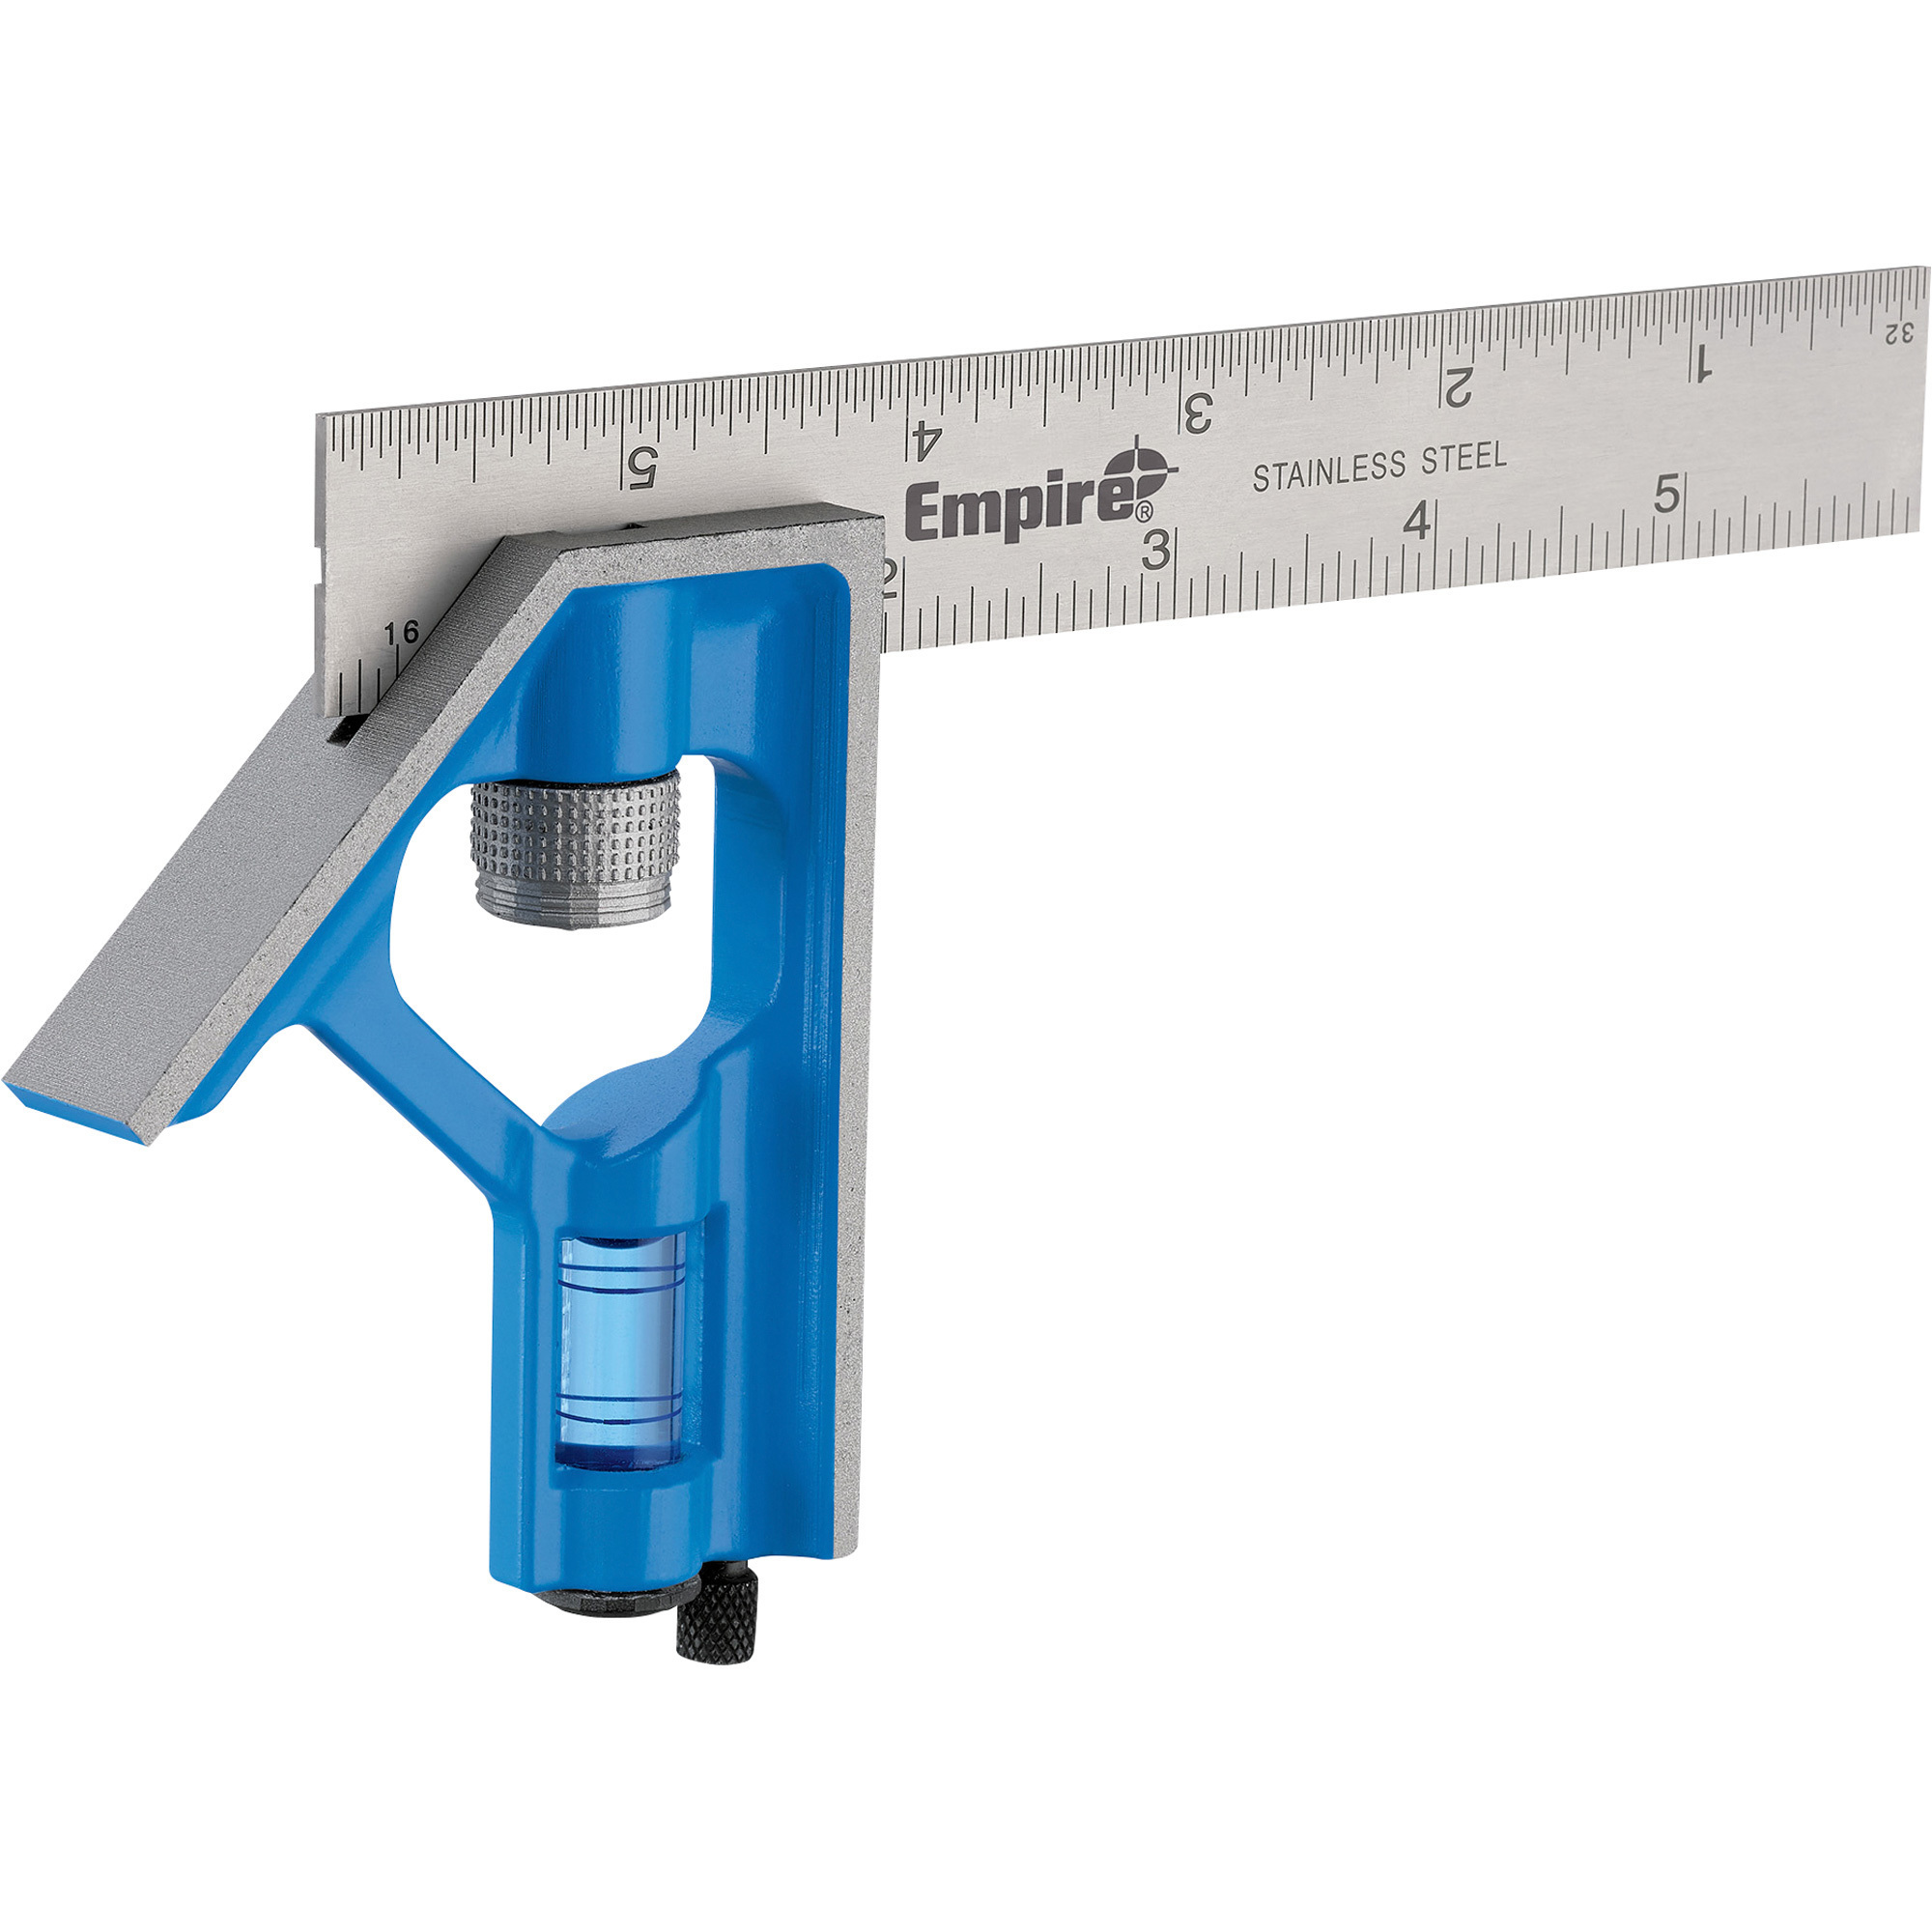 Empire Drywall T-Square, Model# 410-48